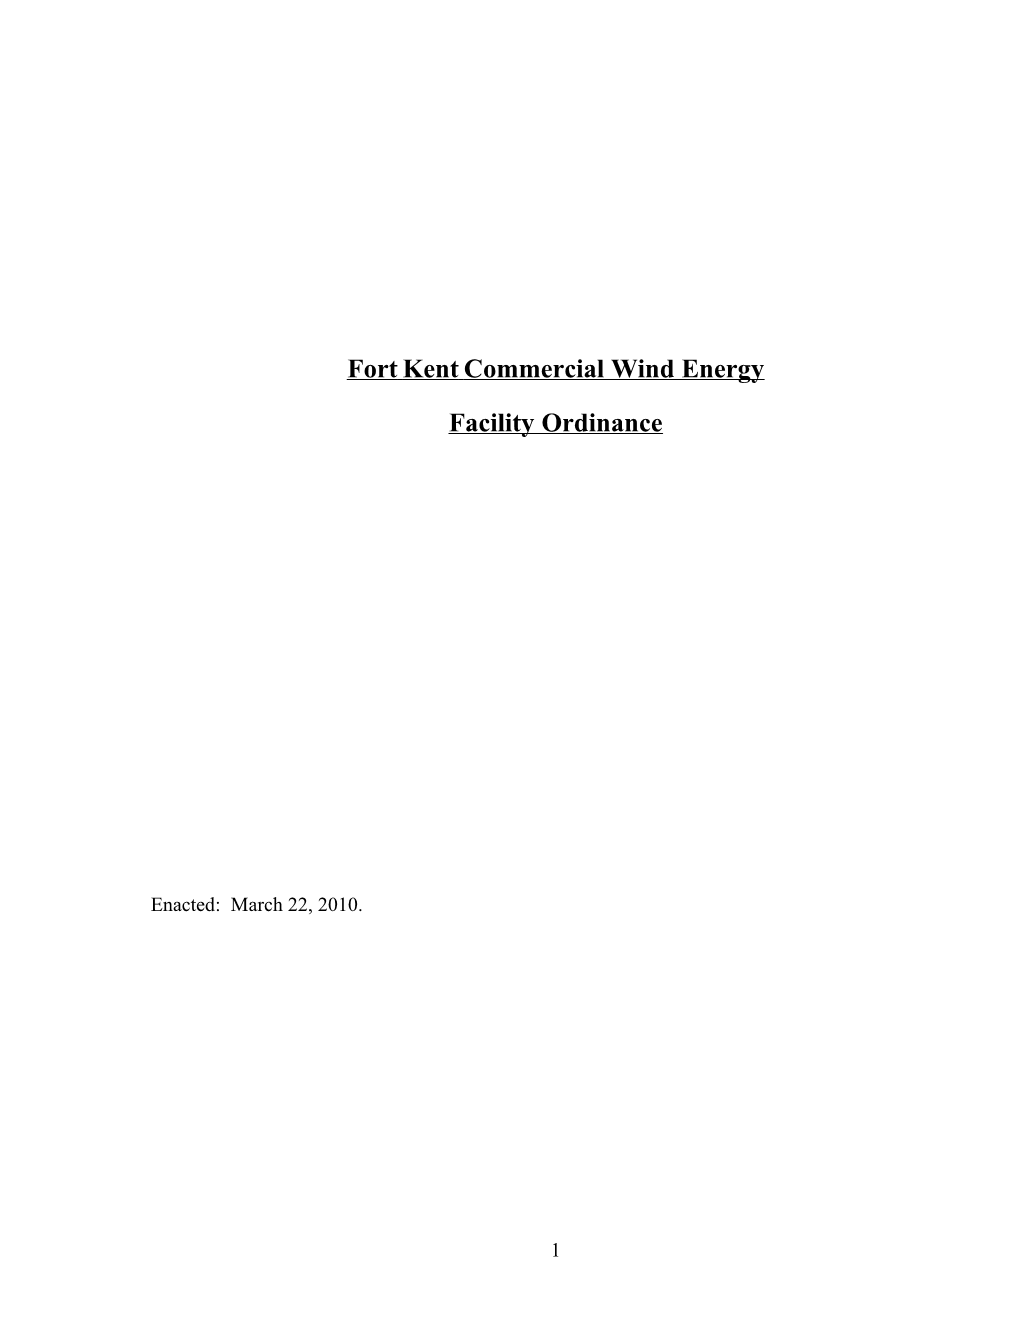 Fort Kent Commercial Wind Energy